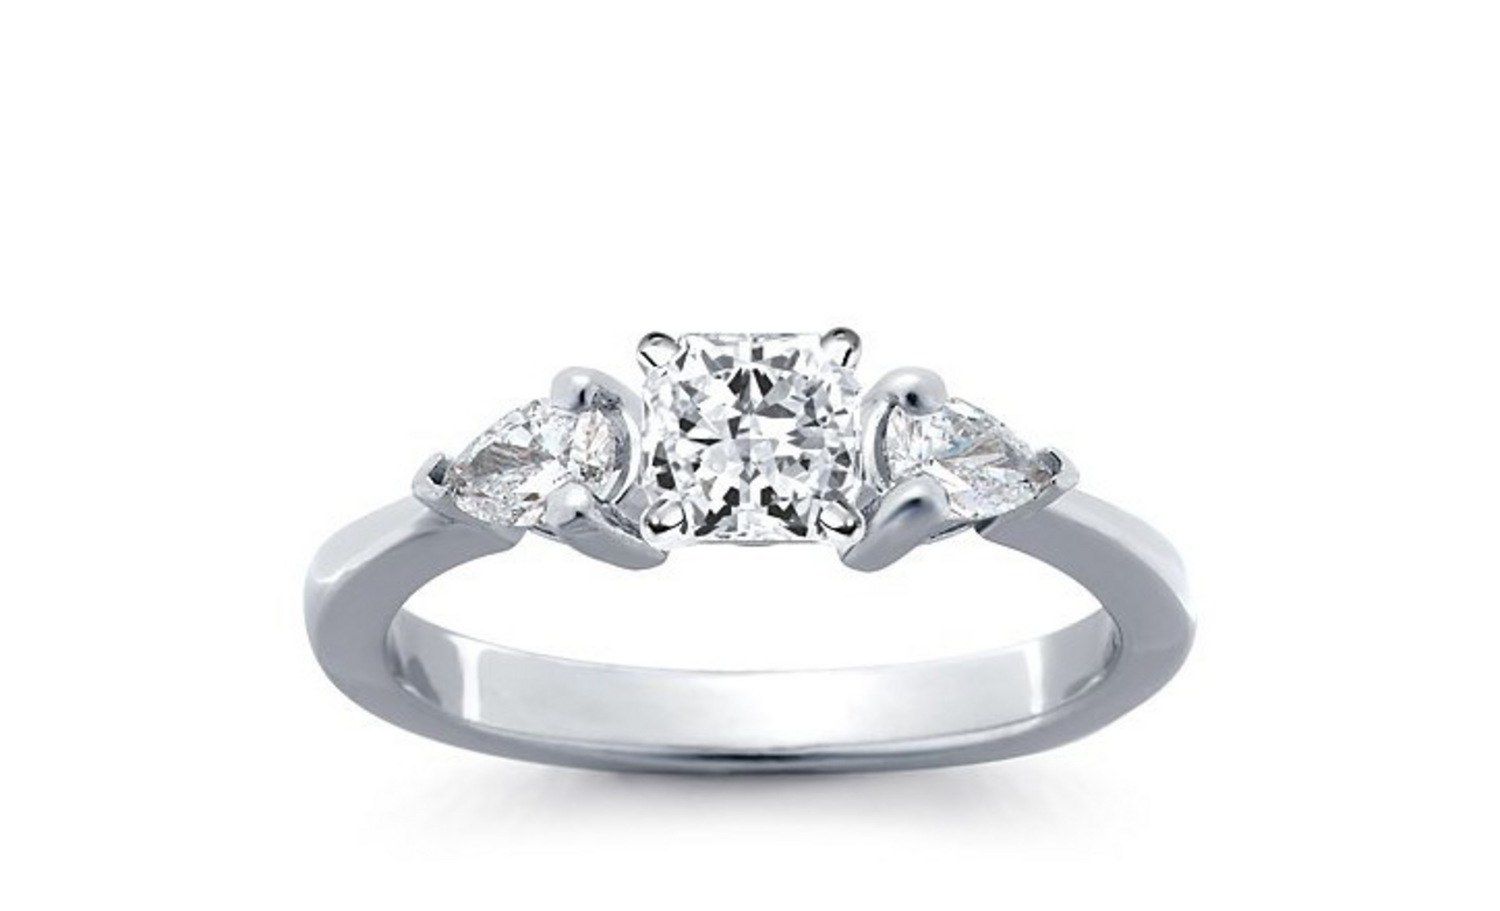 62 Diamond Engagement Rings Under $5,000 | Glamour Intended For Latest Princess Cut Diamond Five Stone Anniversary Bands In White Gold (View 21 of 25)